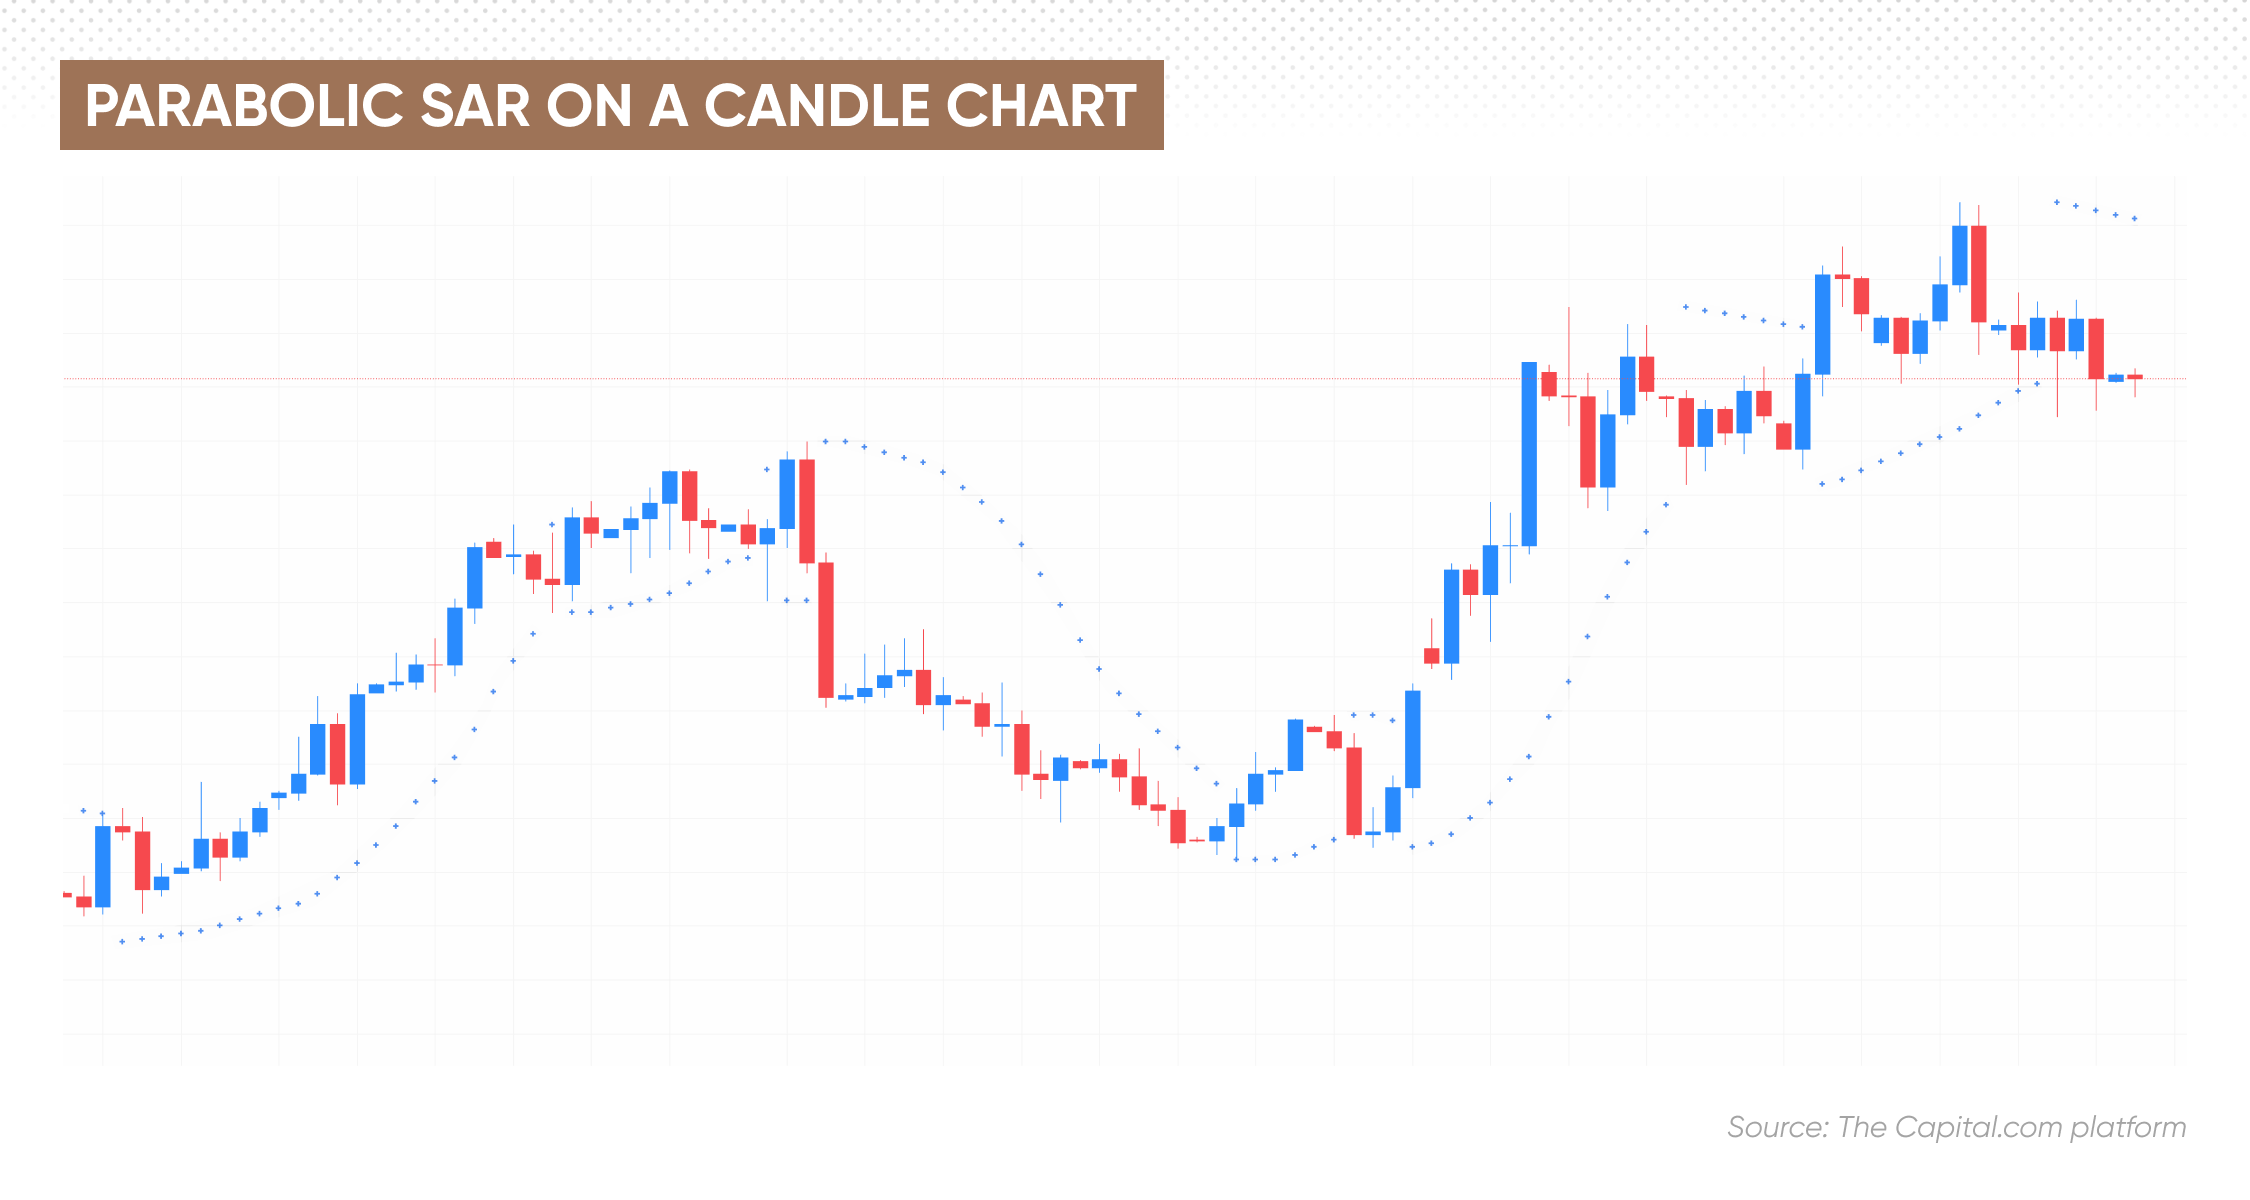 Parabolic sar on a candle chart